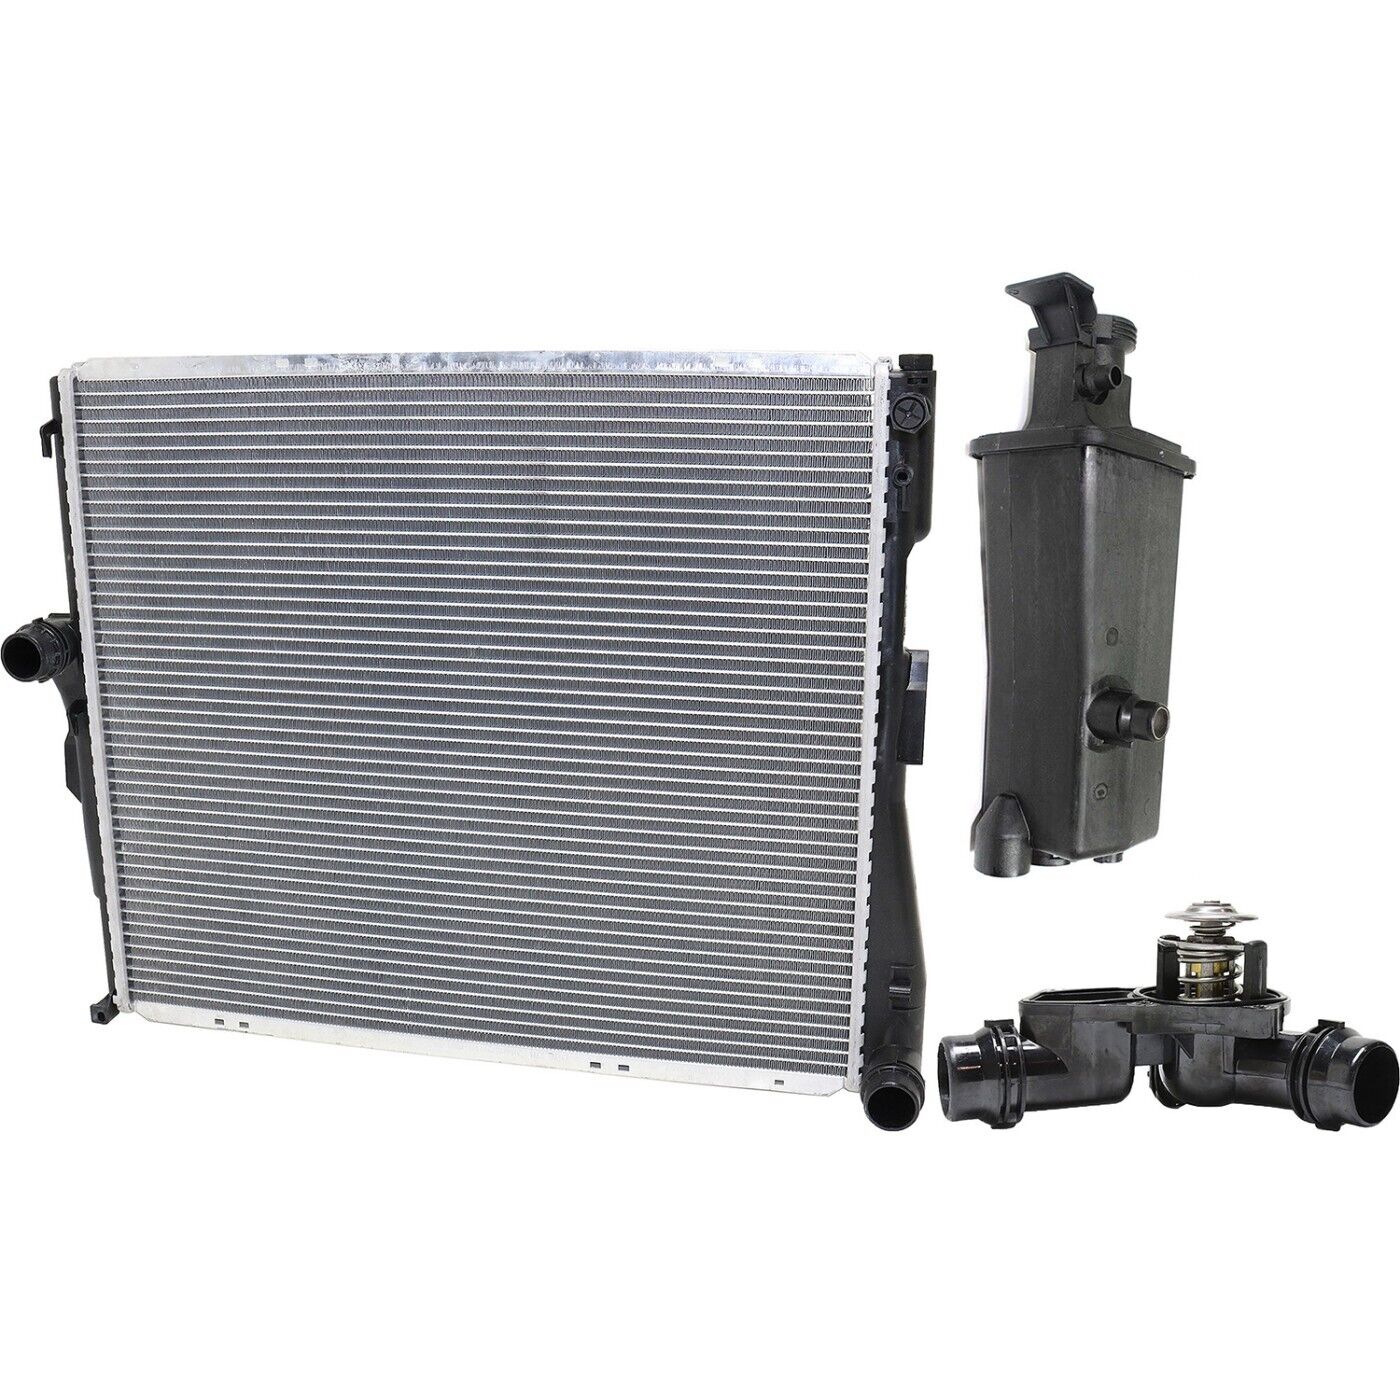 Radiator Kit For 2004-2006 BMW X3 2.5L 3.0L with Coolant Reservoir Thermostat